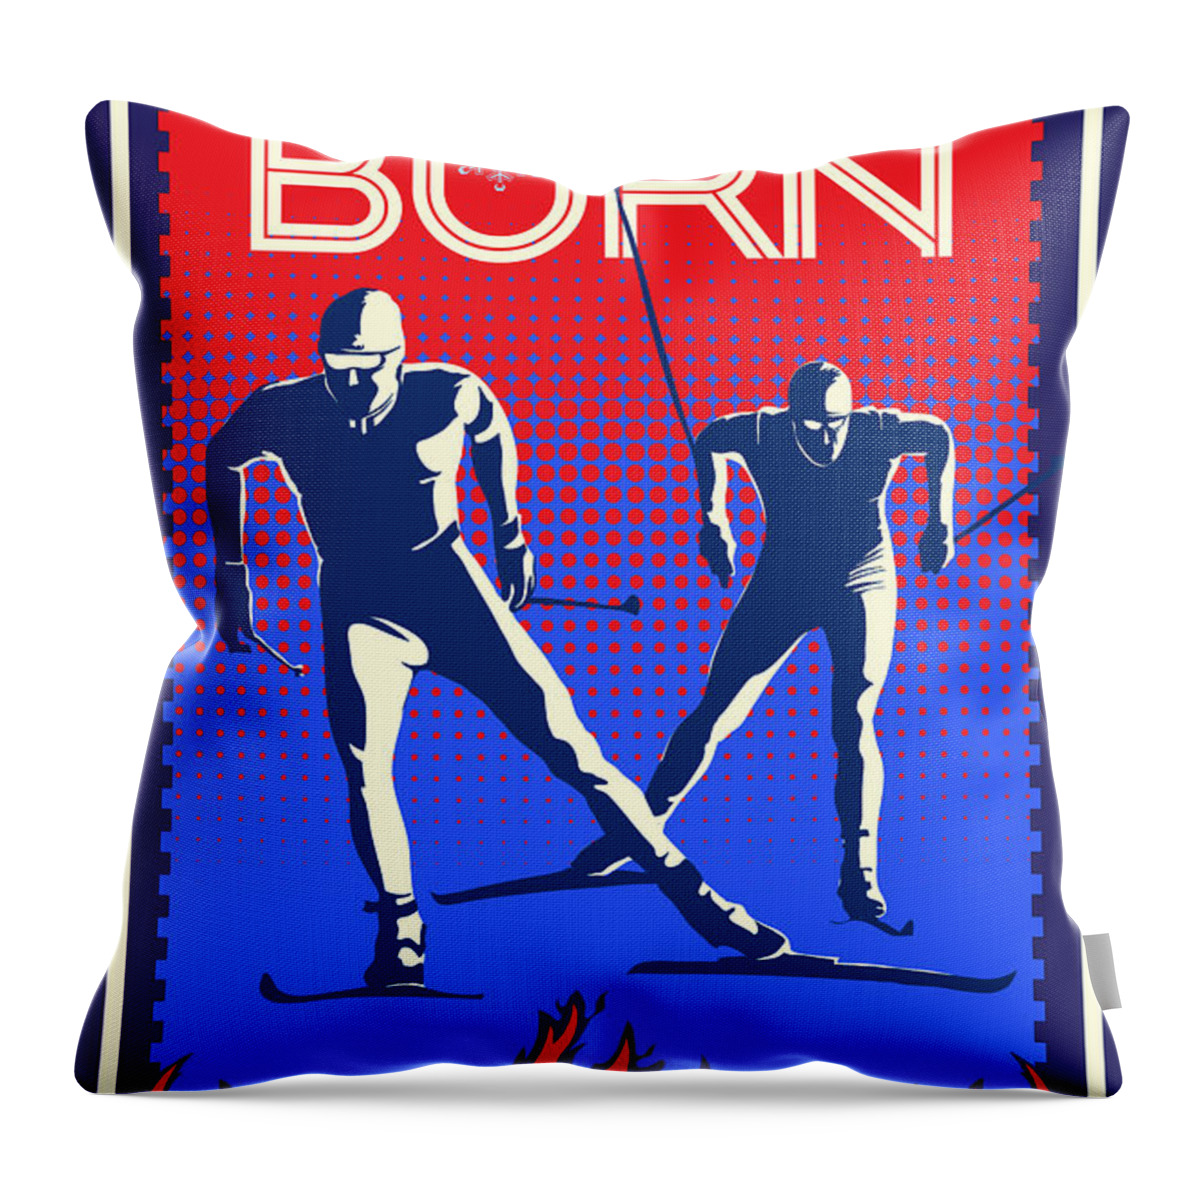 Cross Country Skiing Throw Pillow featuring the painting Feel the Burn XSki by Sassan Filsoof